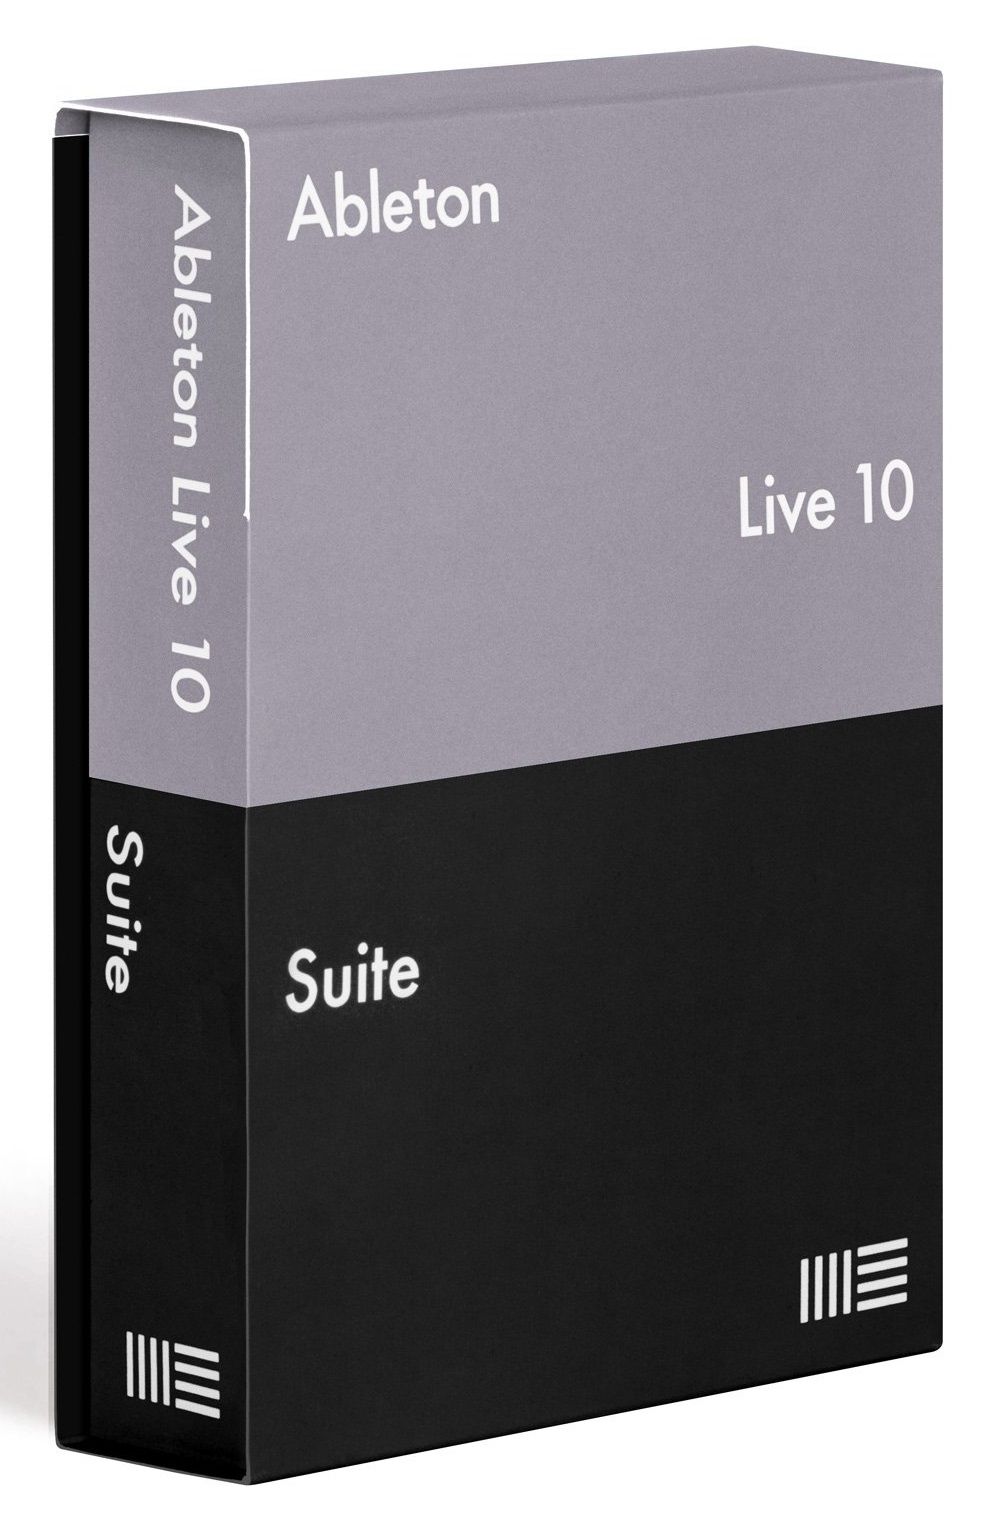 Ableton live 10 free download mac full version youtube